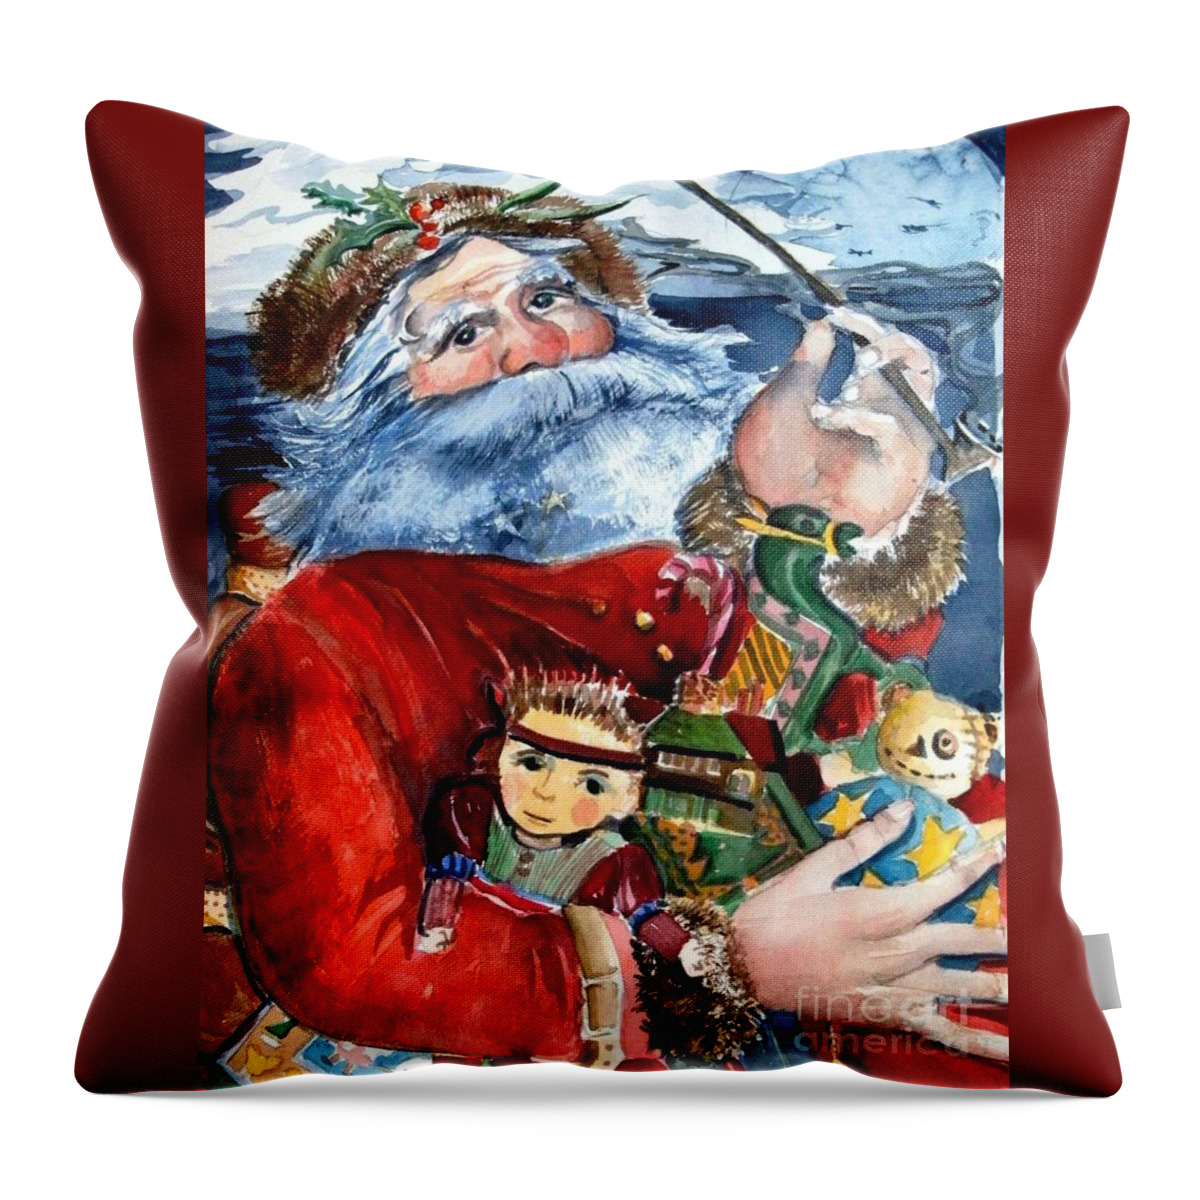 Christmas Throw Pillow featuring the painting Santa by Mindy Newman